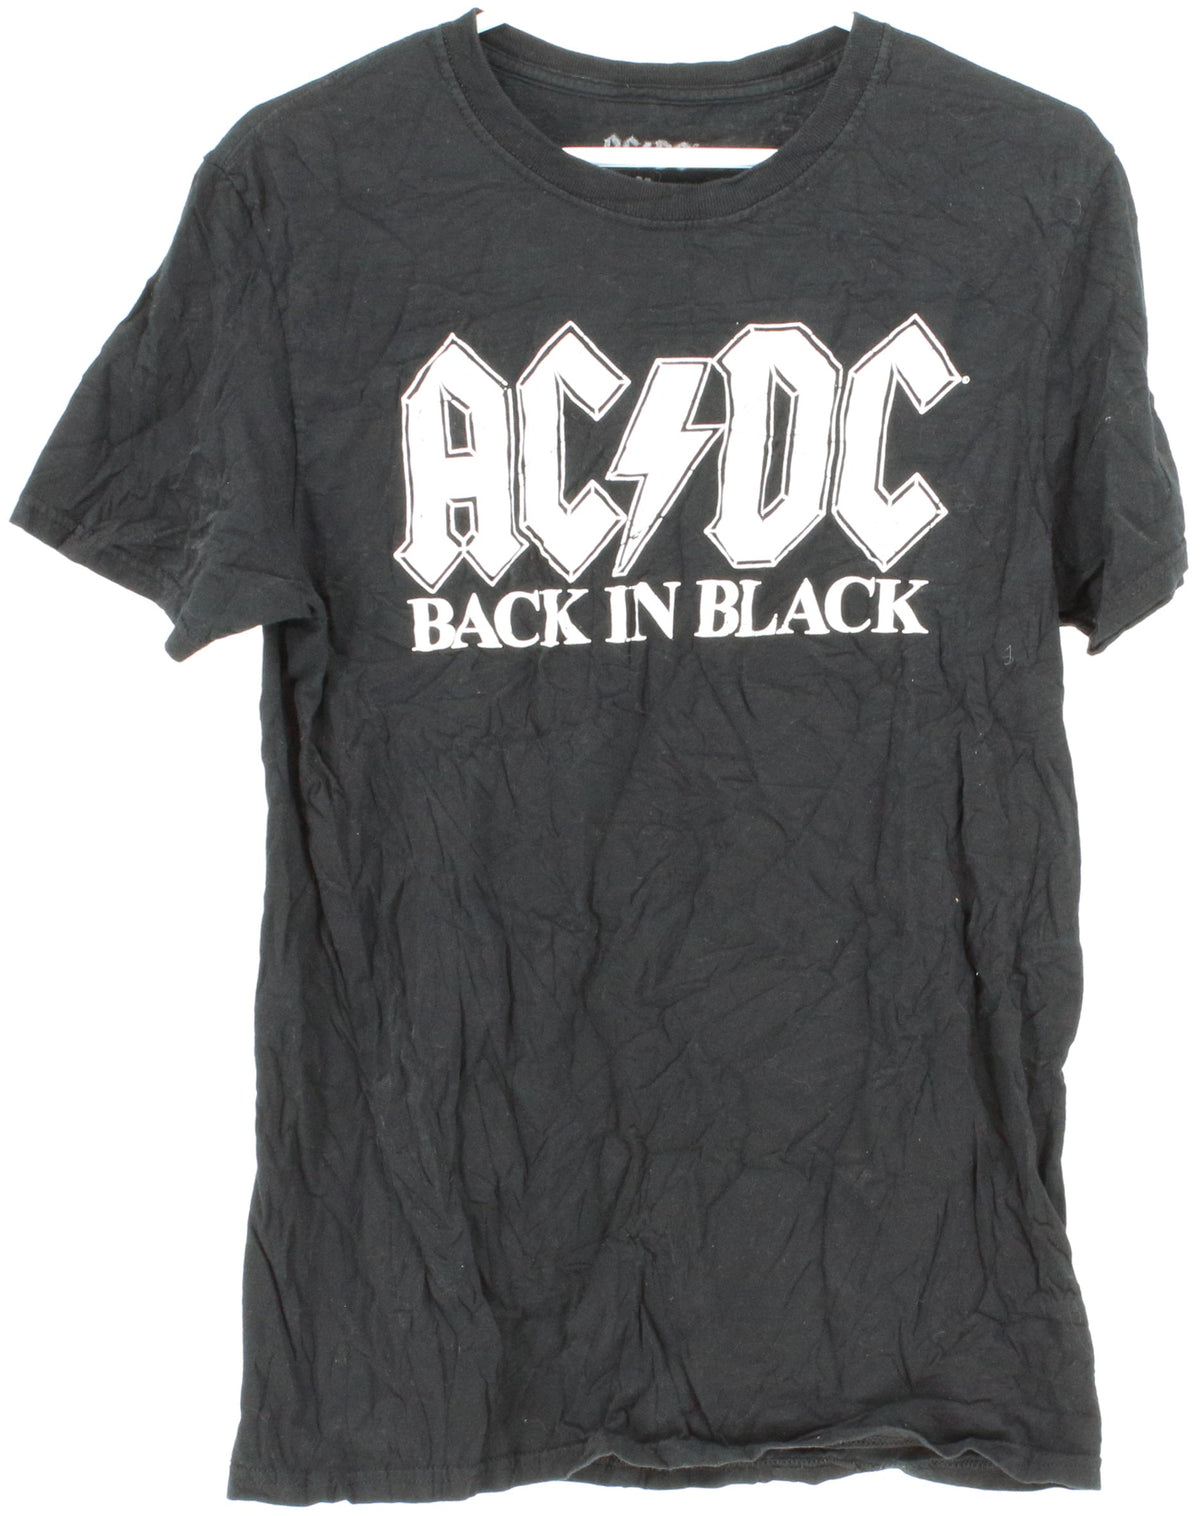 ACDC Back in Black Band Tee